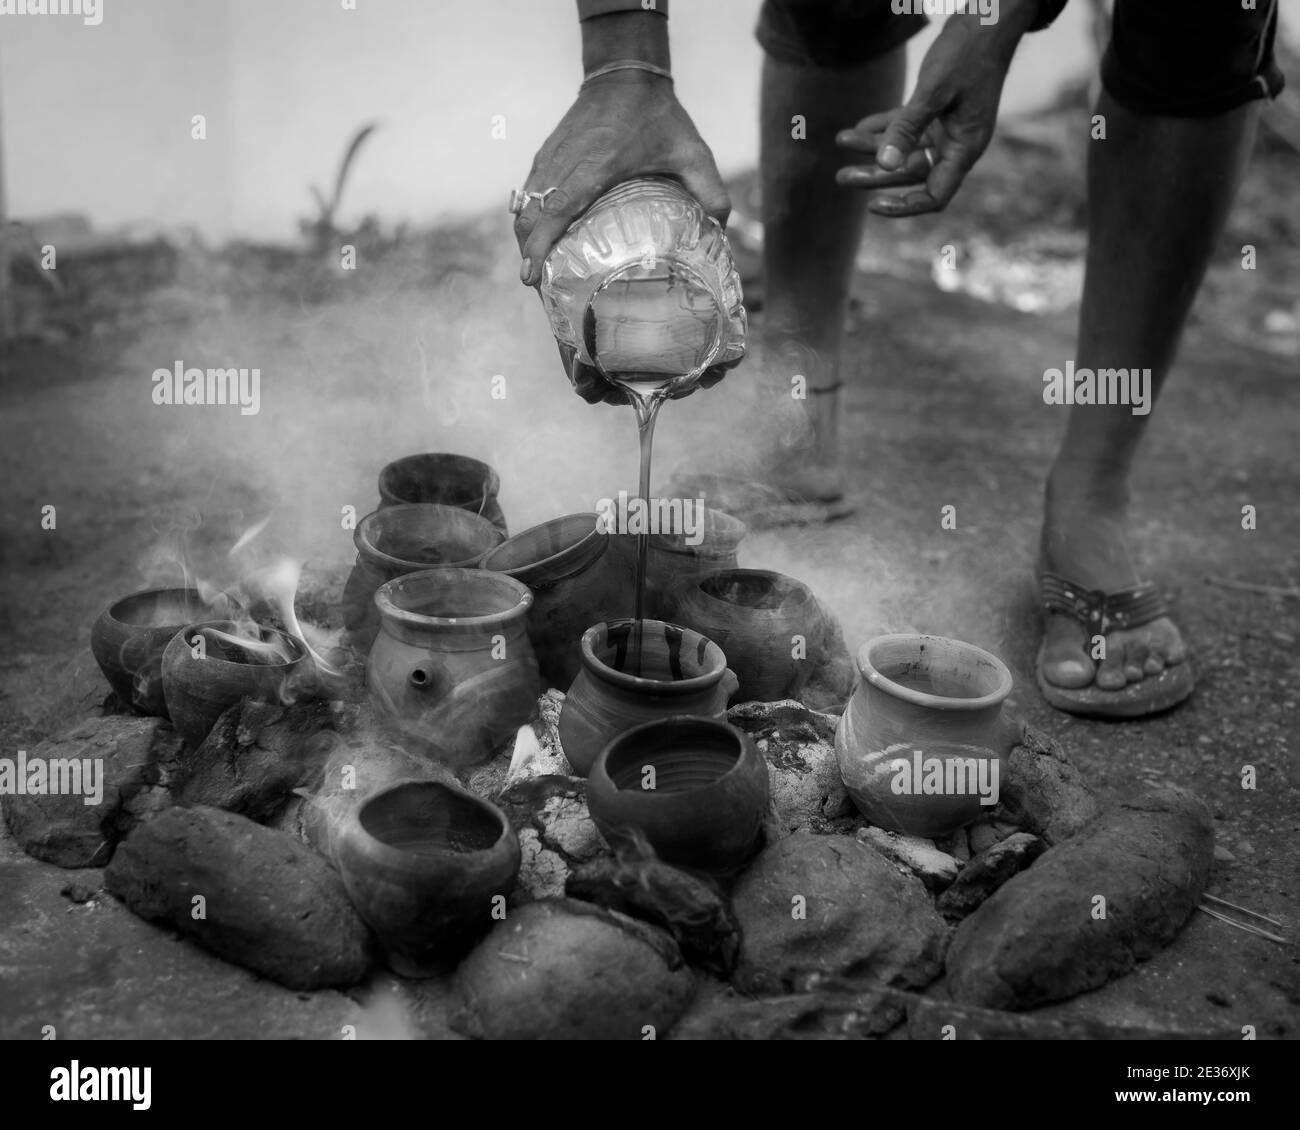 Black and white street photograph of a man pouring oil into fire lamps in India Stock Photo